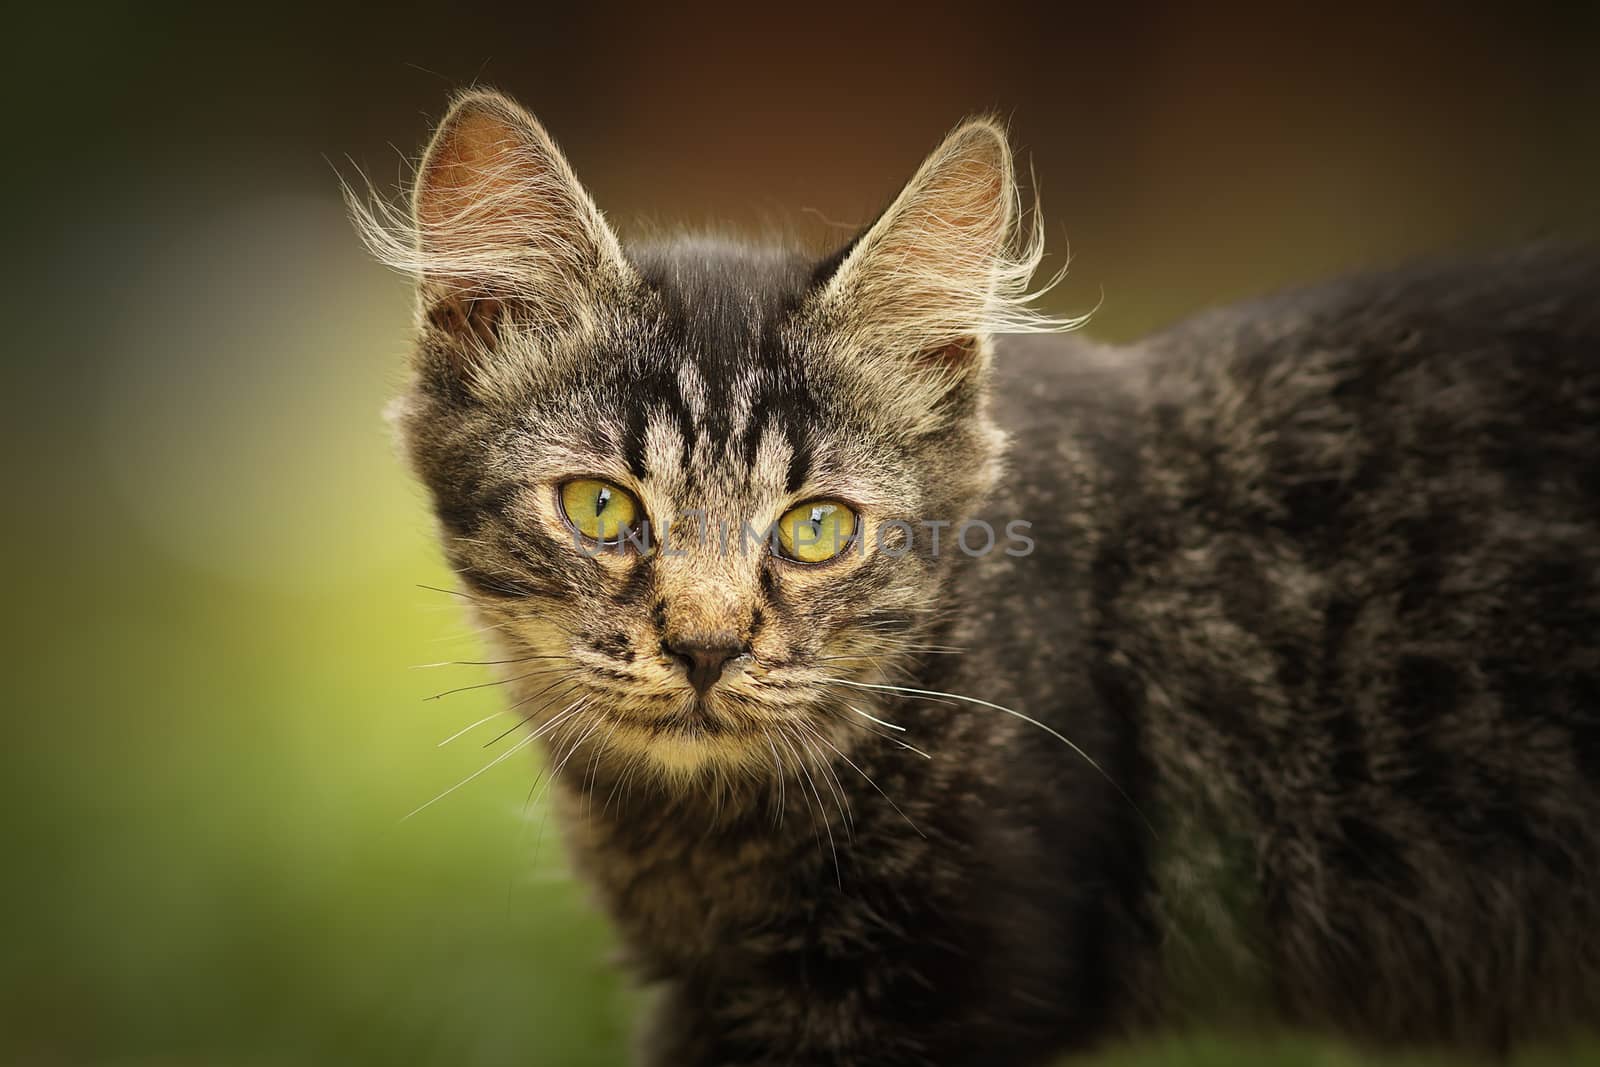 portrait of fluffy young domestic cat looking towards the camera, curious animal